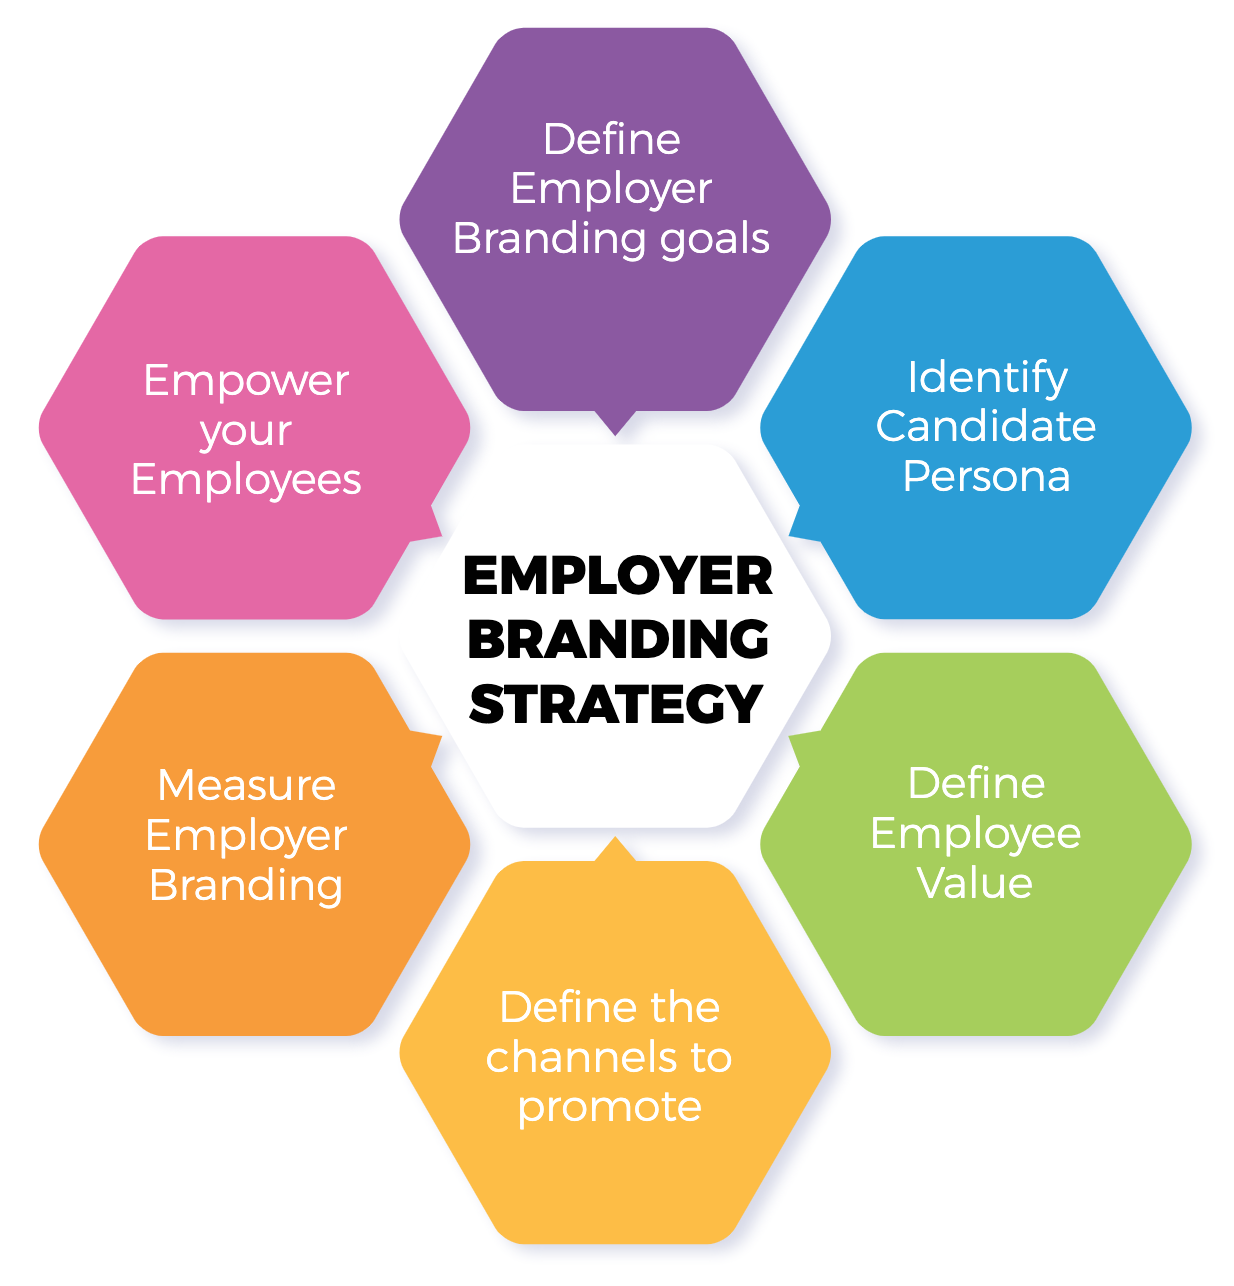 Employer Branding Strategy of Shrofile HR Consulting